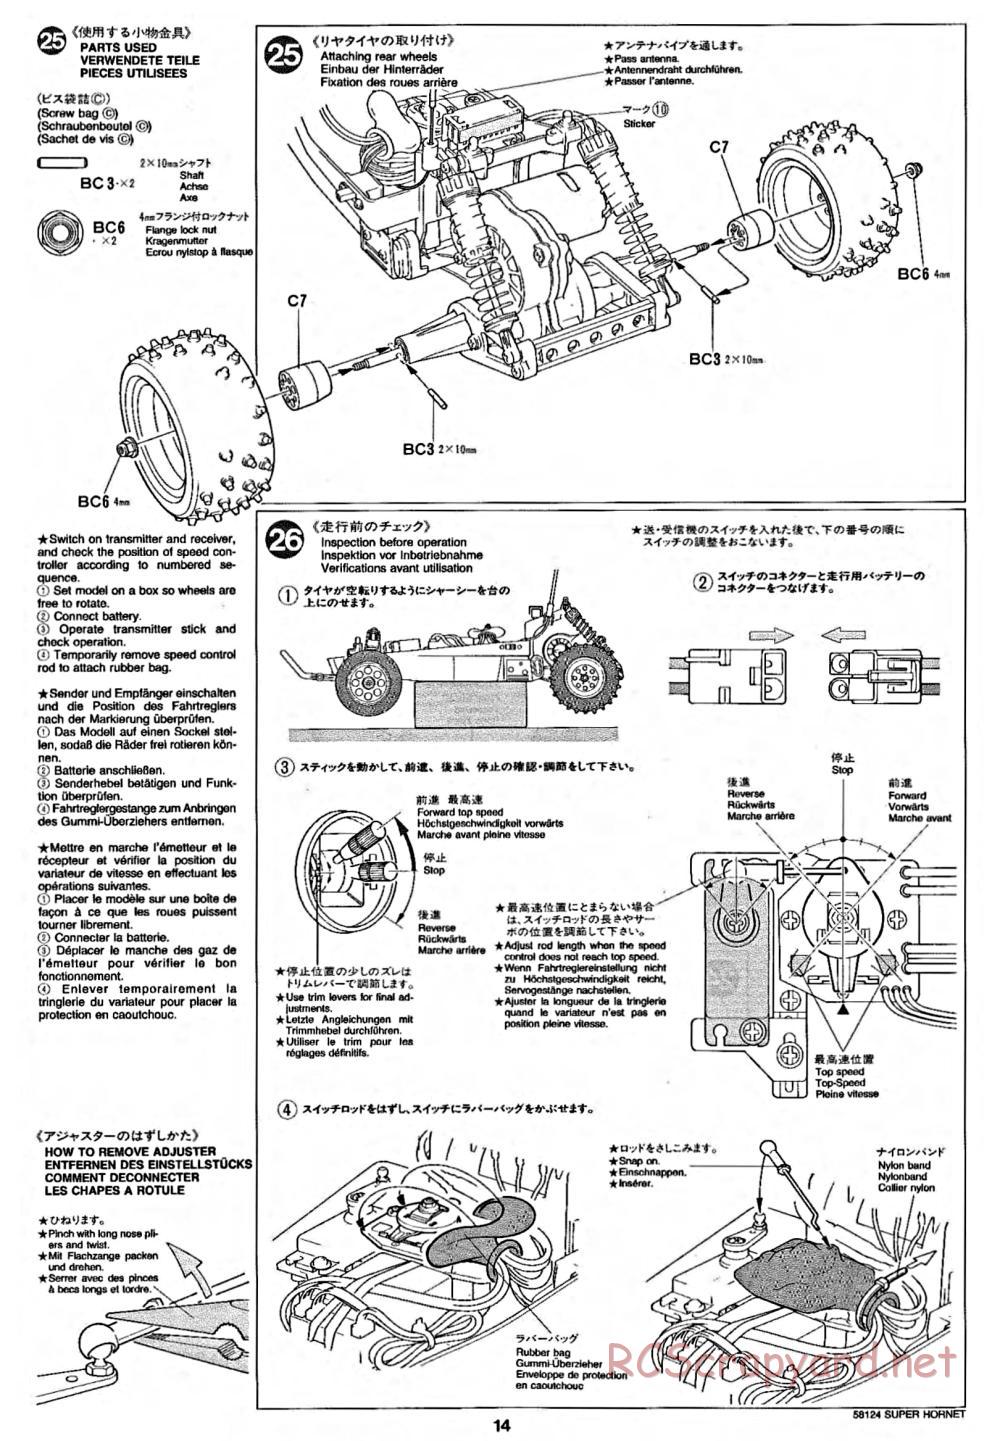 Tamiya - Super Hornet Chassis - Manual - Page 14